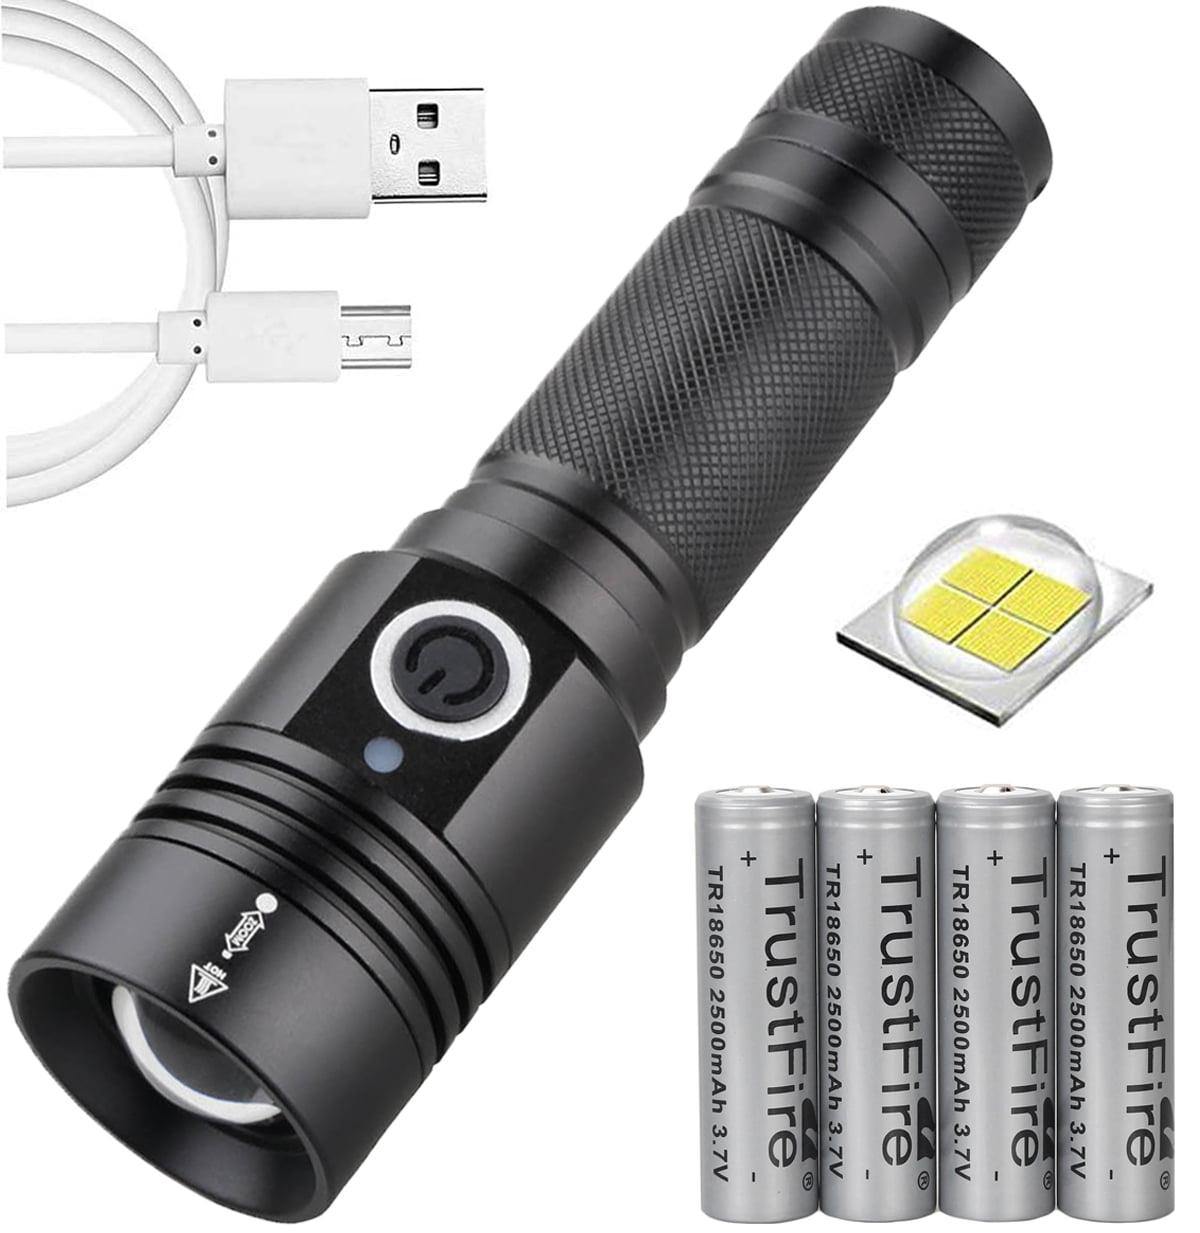 Zoomable LED Flashlight 3Modes Torch Light 18650 Battery Light US Stock 